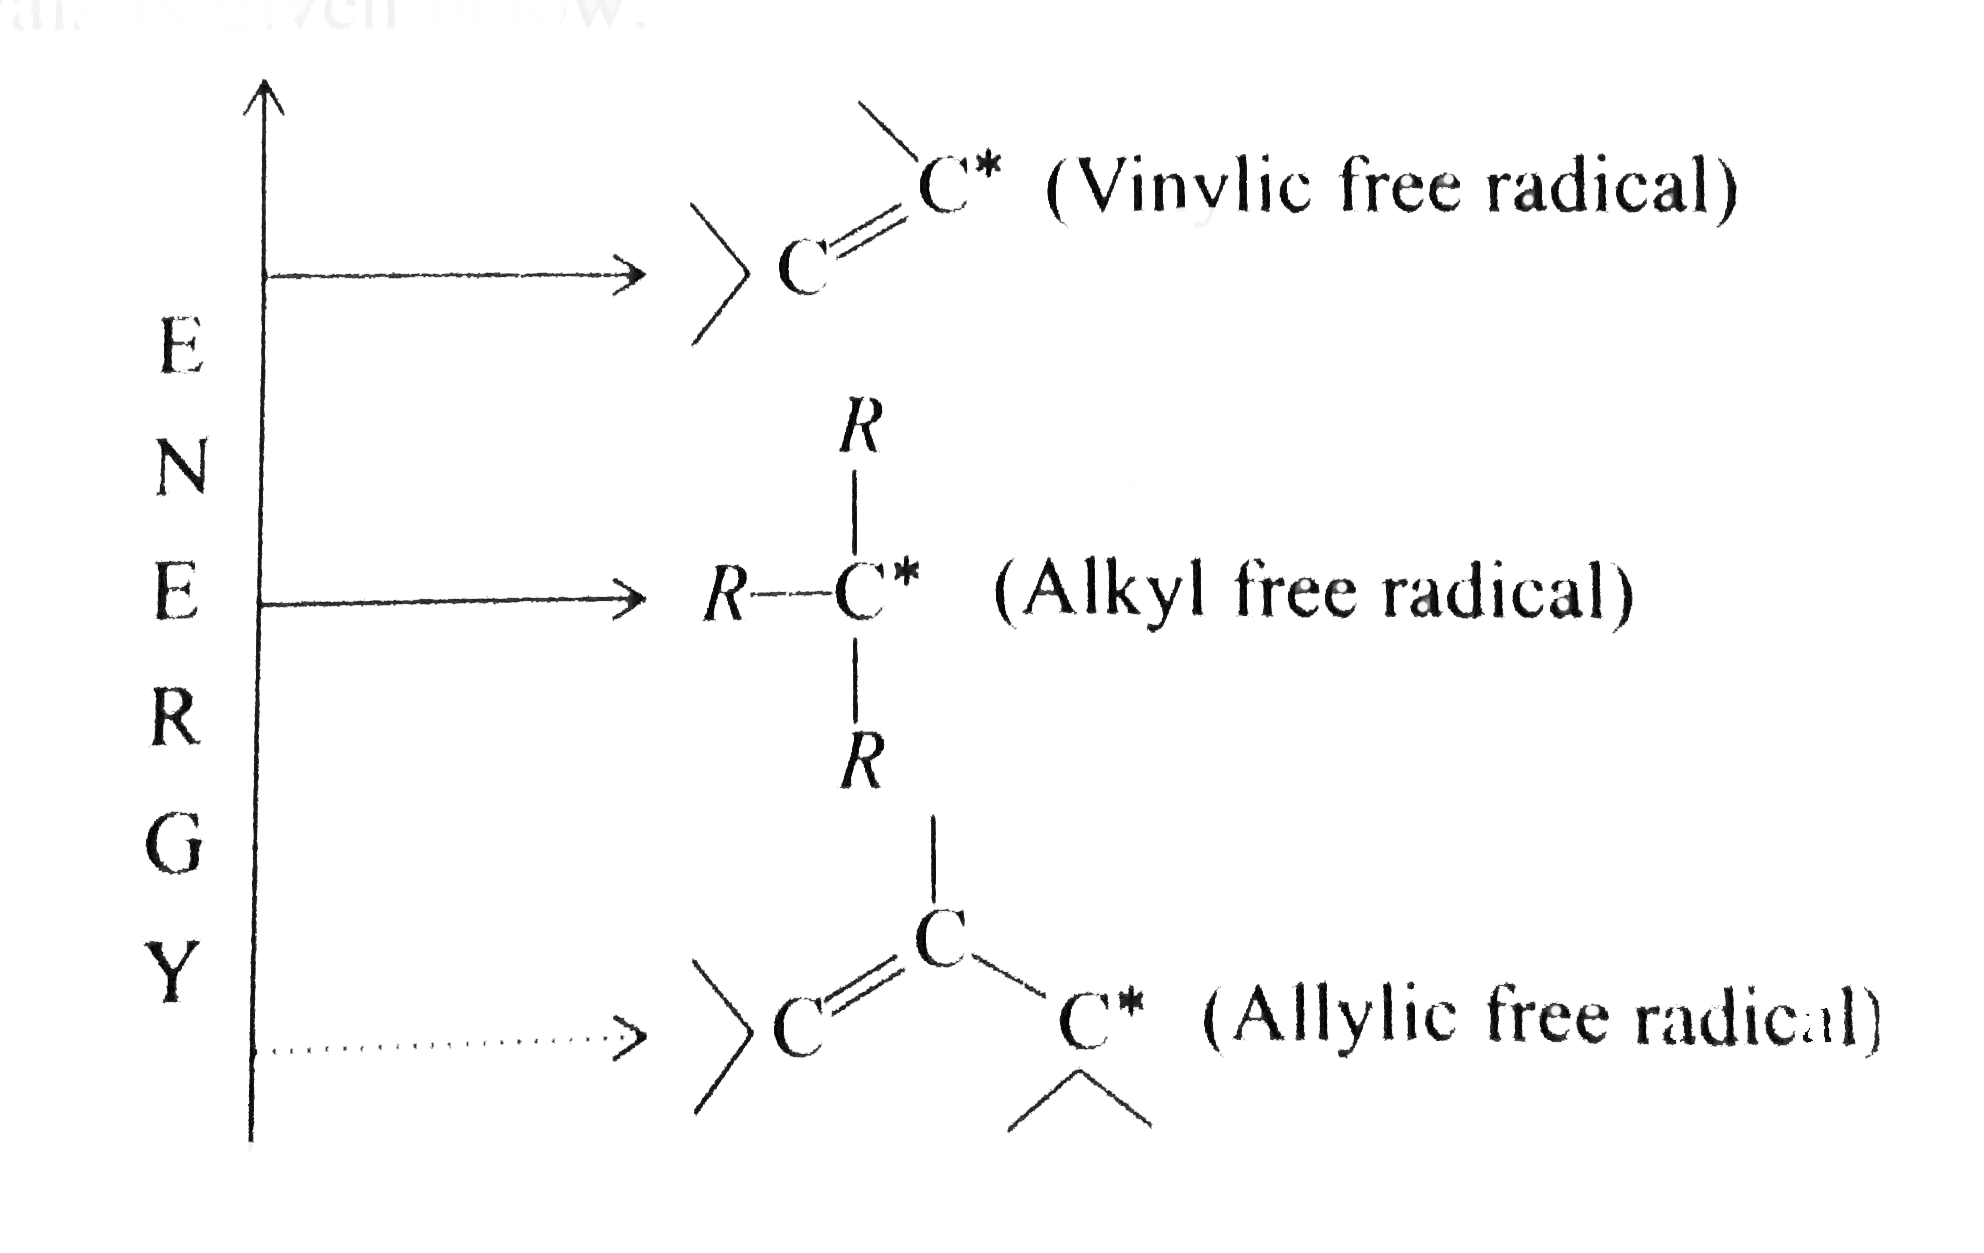 Karl Ziegler reported alkenes react with N-bromosuccinimide (NBS) in presence of light to products resulting from substitution of hydrogen by bromine at the allylic position i.e., the position next to